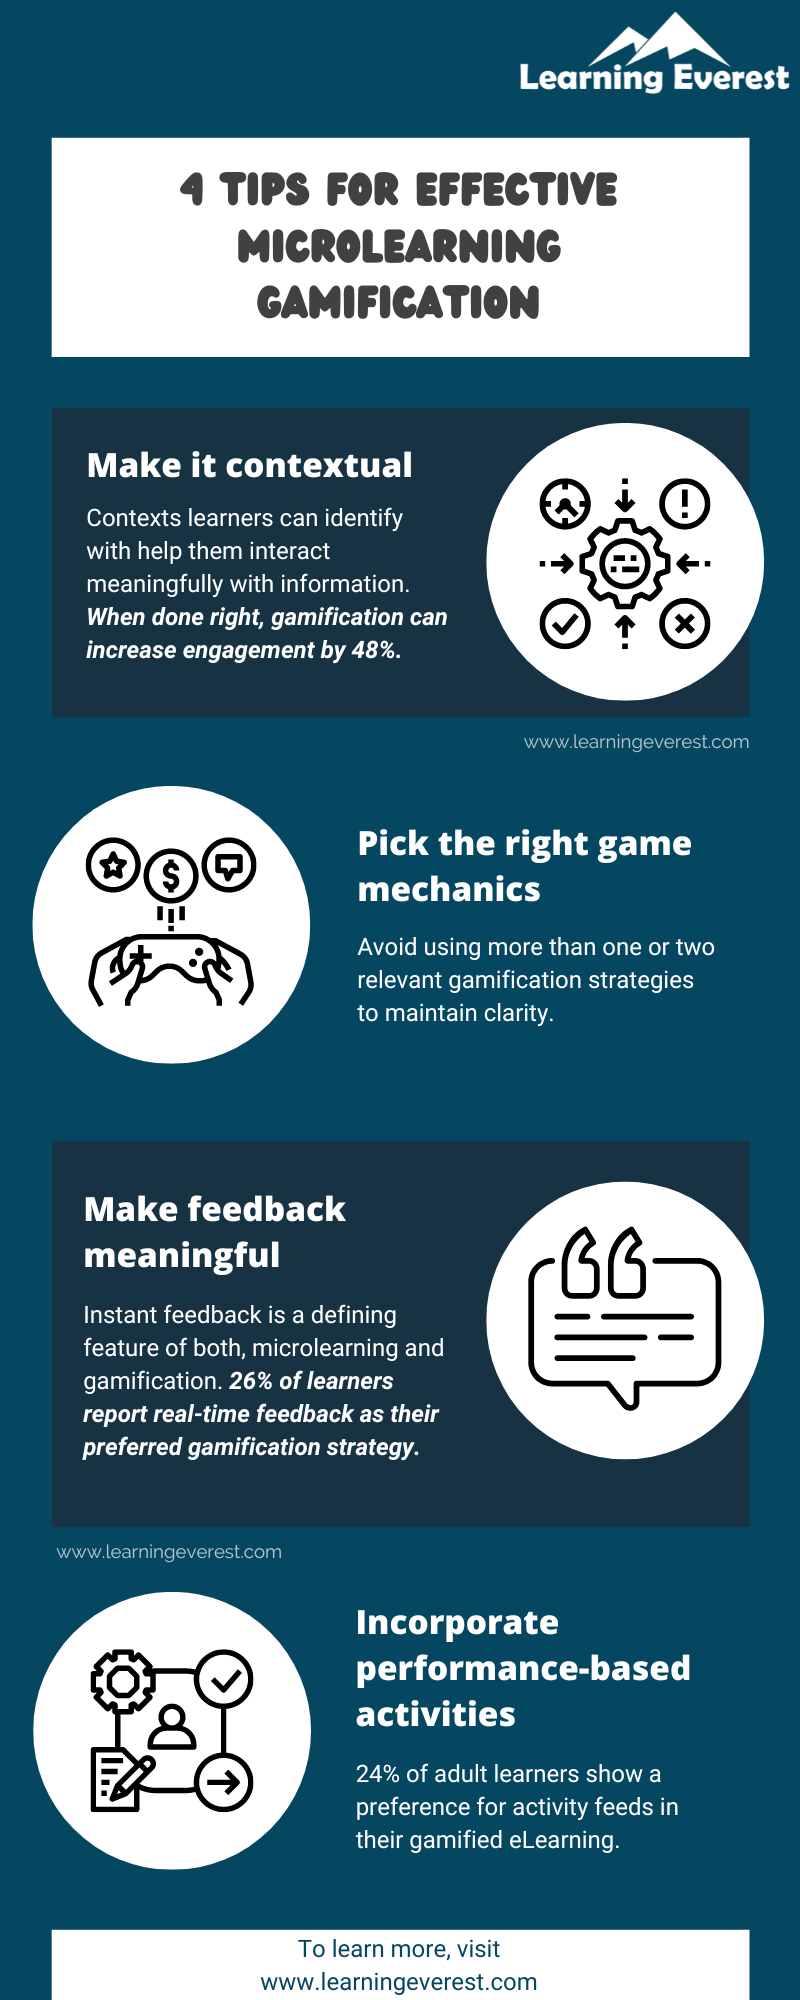 4 tips for effective microlearning gamification 